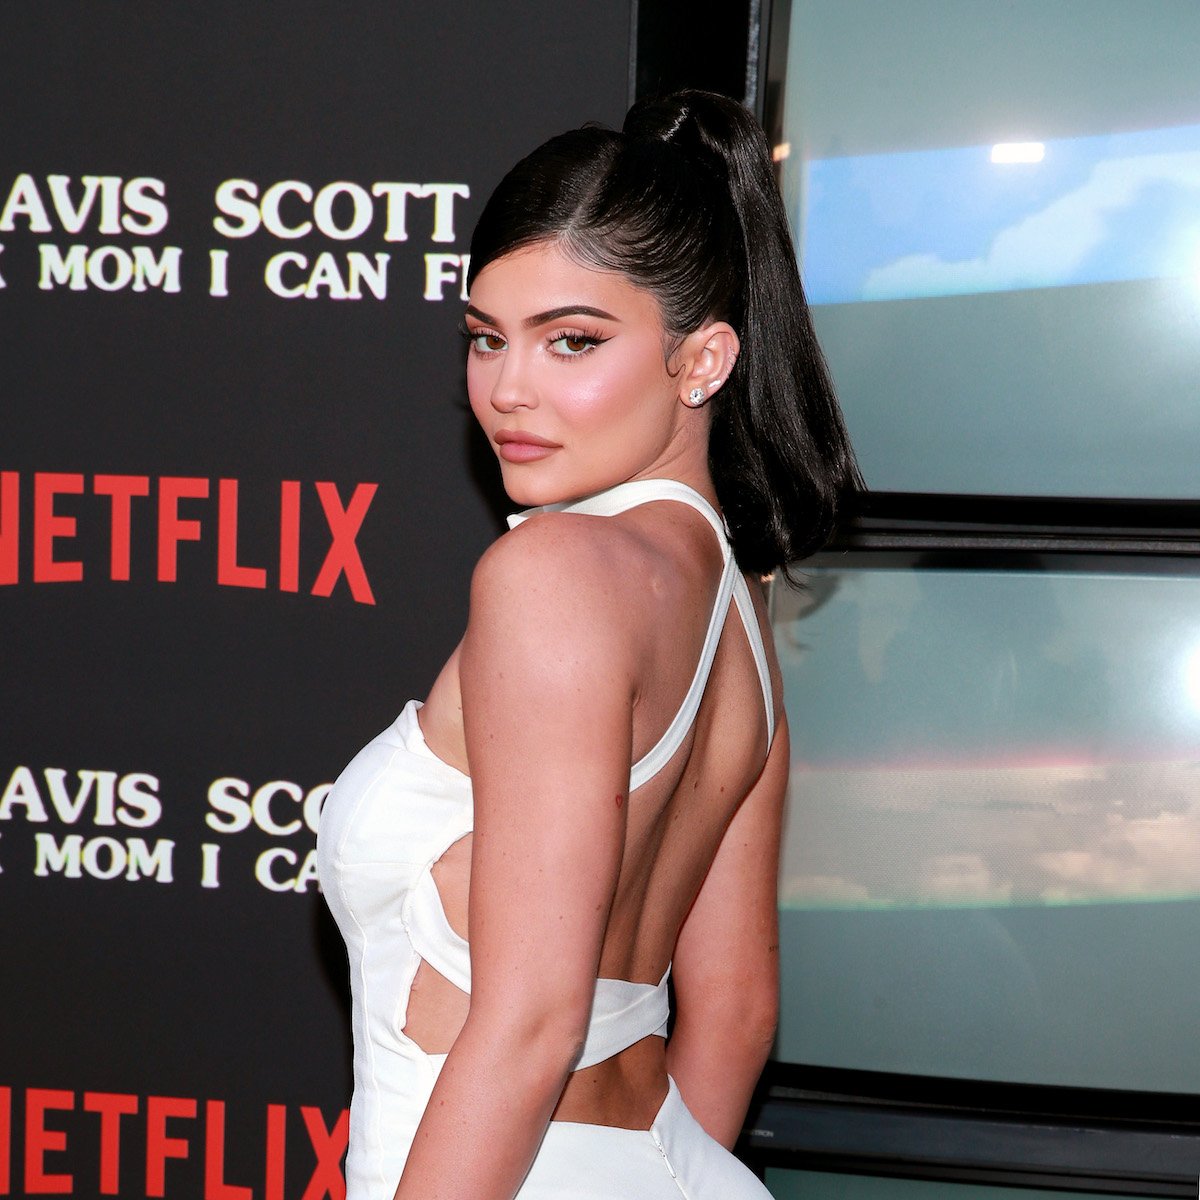 Kylie Jenner looks over her shoulder at the camera wearing a white dress and a high ponytail.